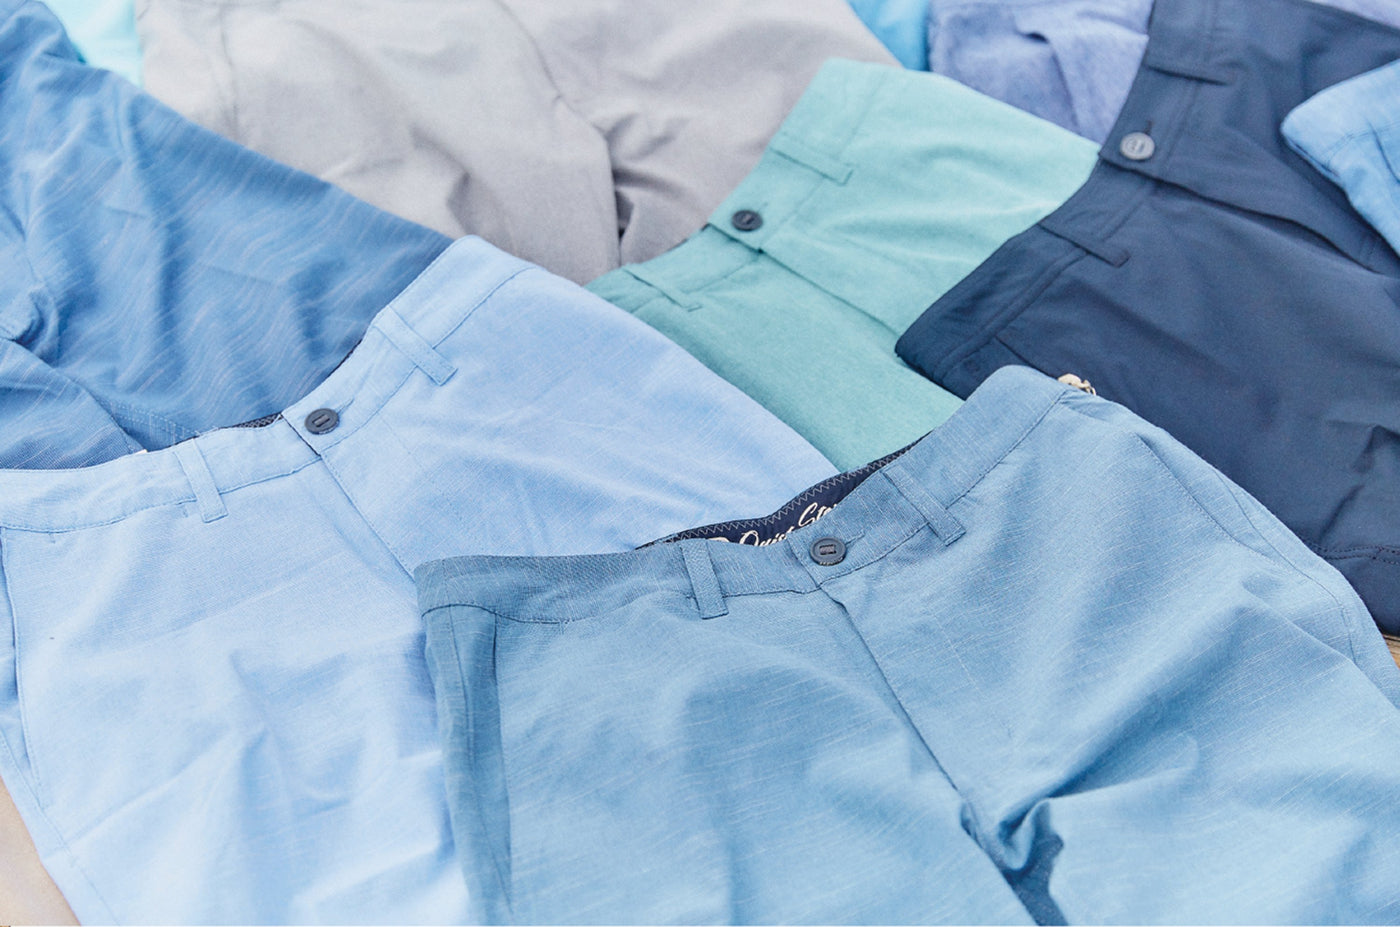 An assortment of shorts showing various colors.